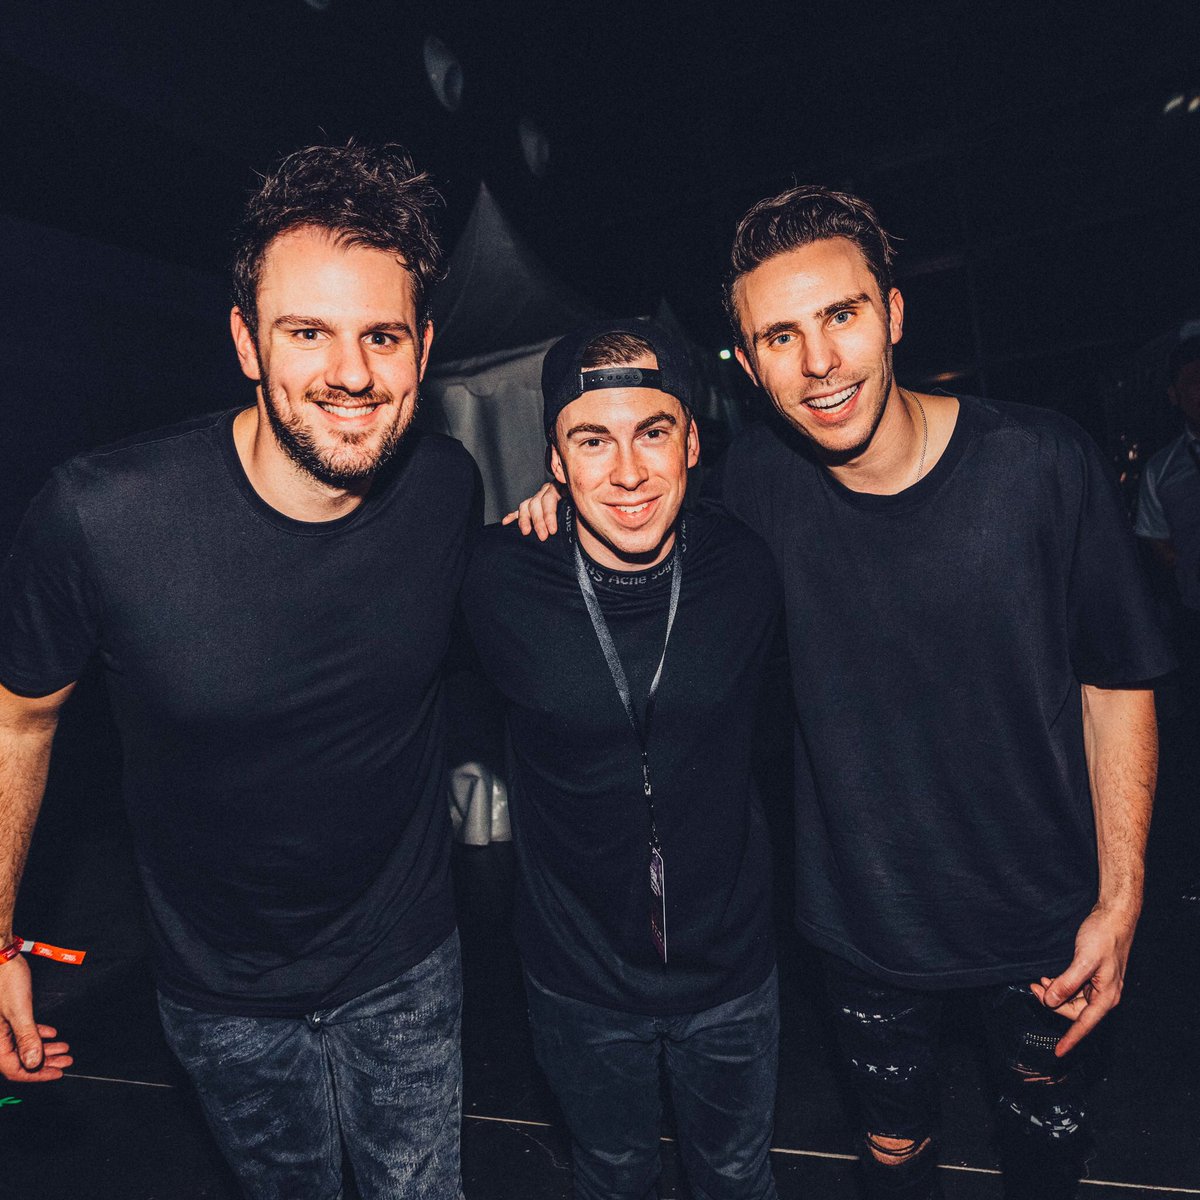 Happy Birthday Hardwell!! Thanks for the continuous support and being an amazing friend!! 🎉❤ https://t.co/VSLBIVtVZN